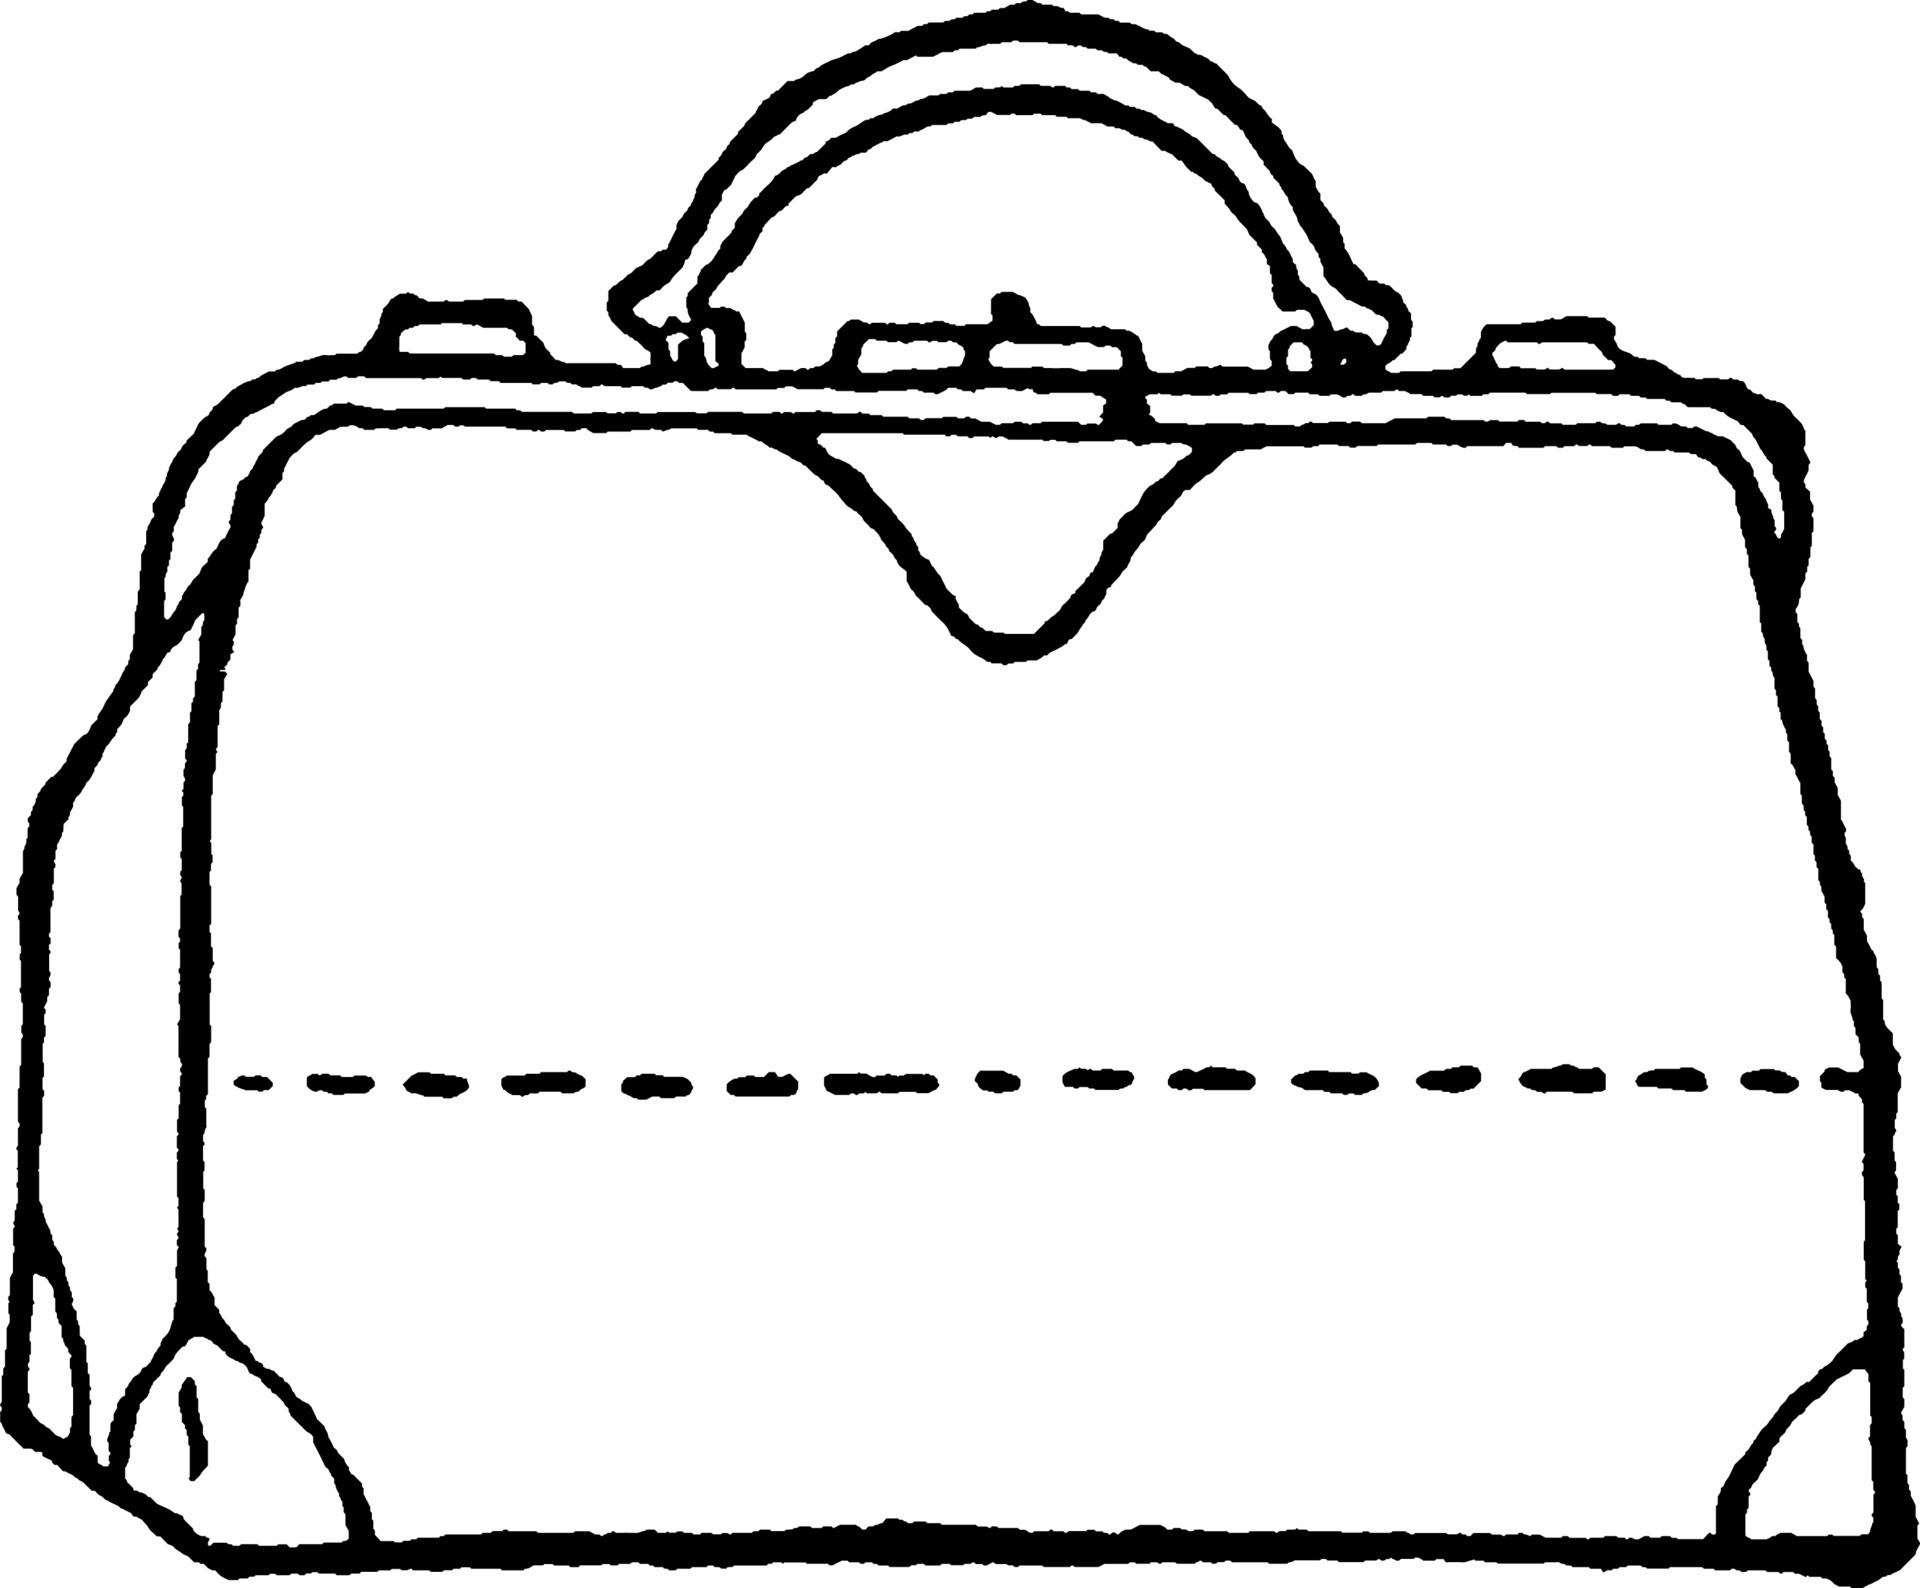 Luggage bag illustration, drawing, engraving, ink, line art, vector Stock  Vector